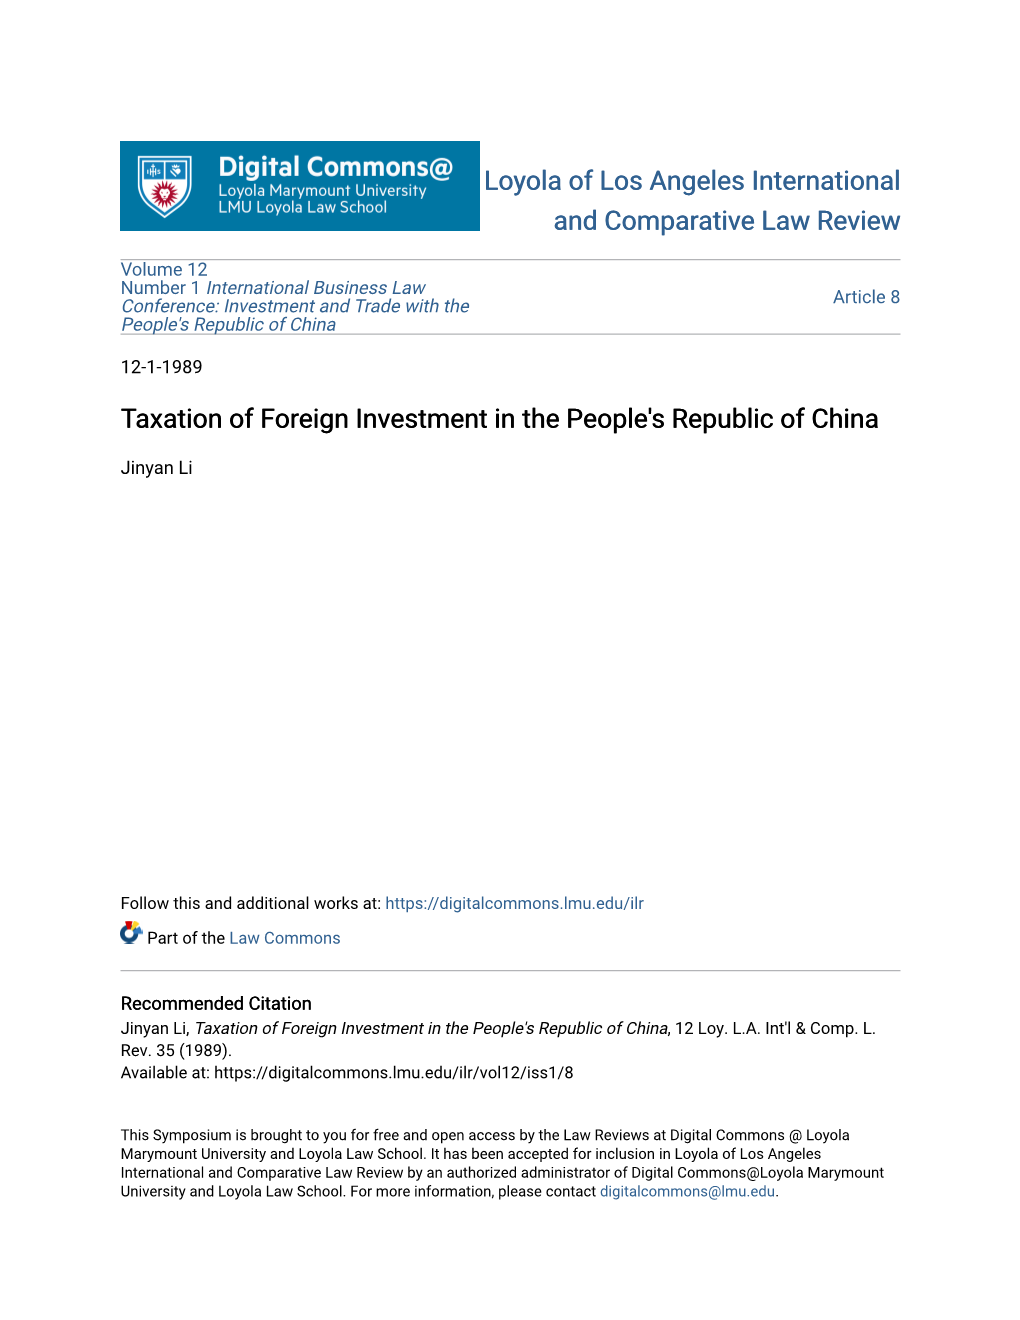 Taxation of Foreign Investment in the People's Republic of China